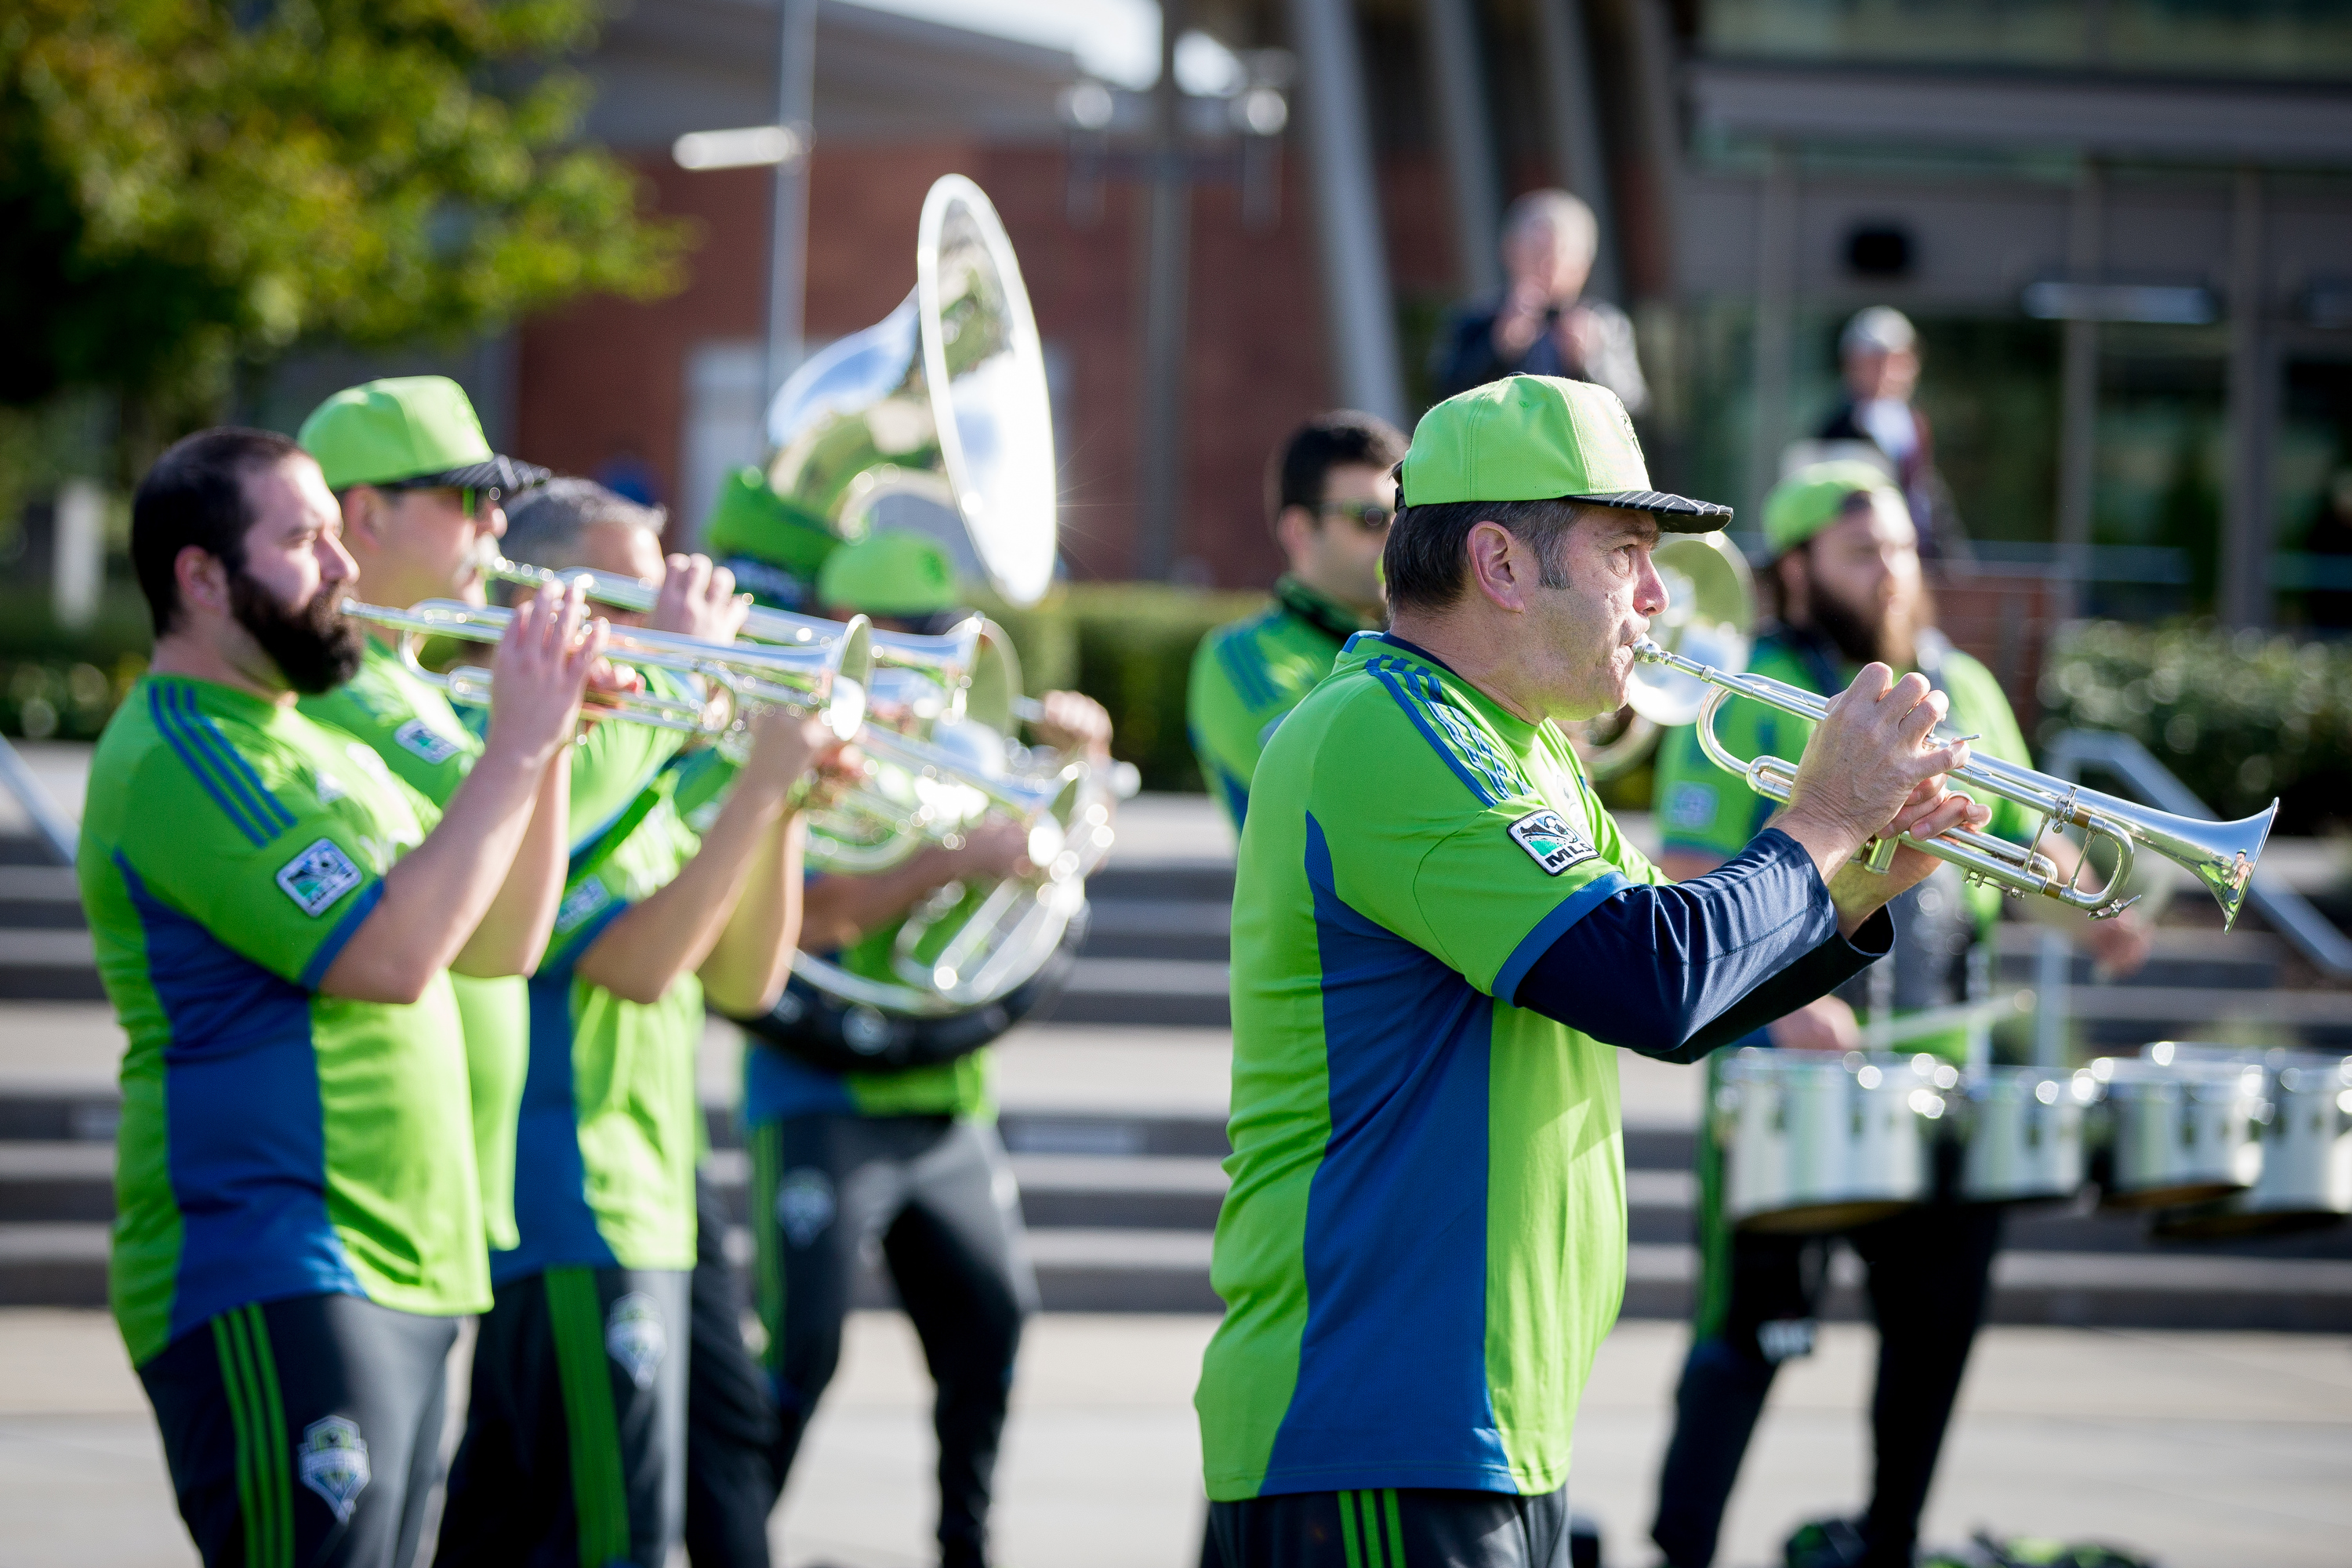 Sound Wave, the Sounders marching band, kicks off the festivities.